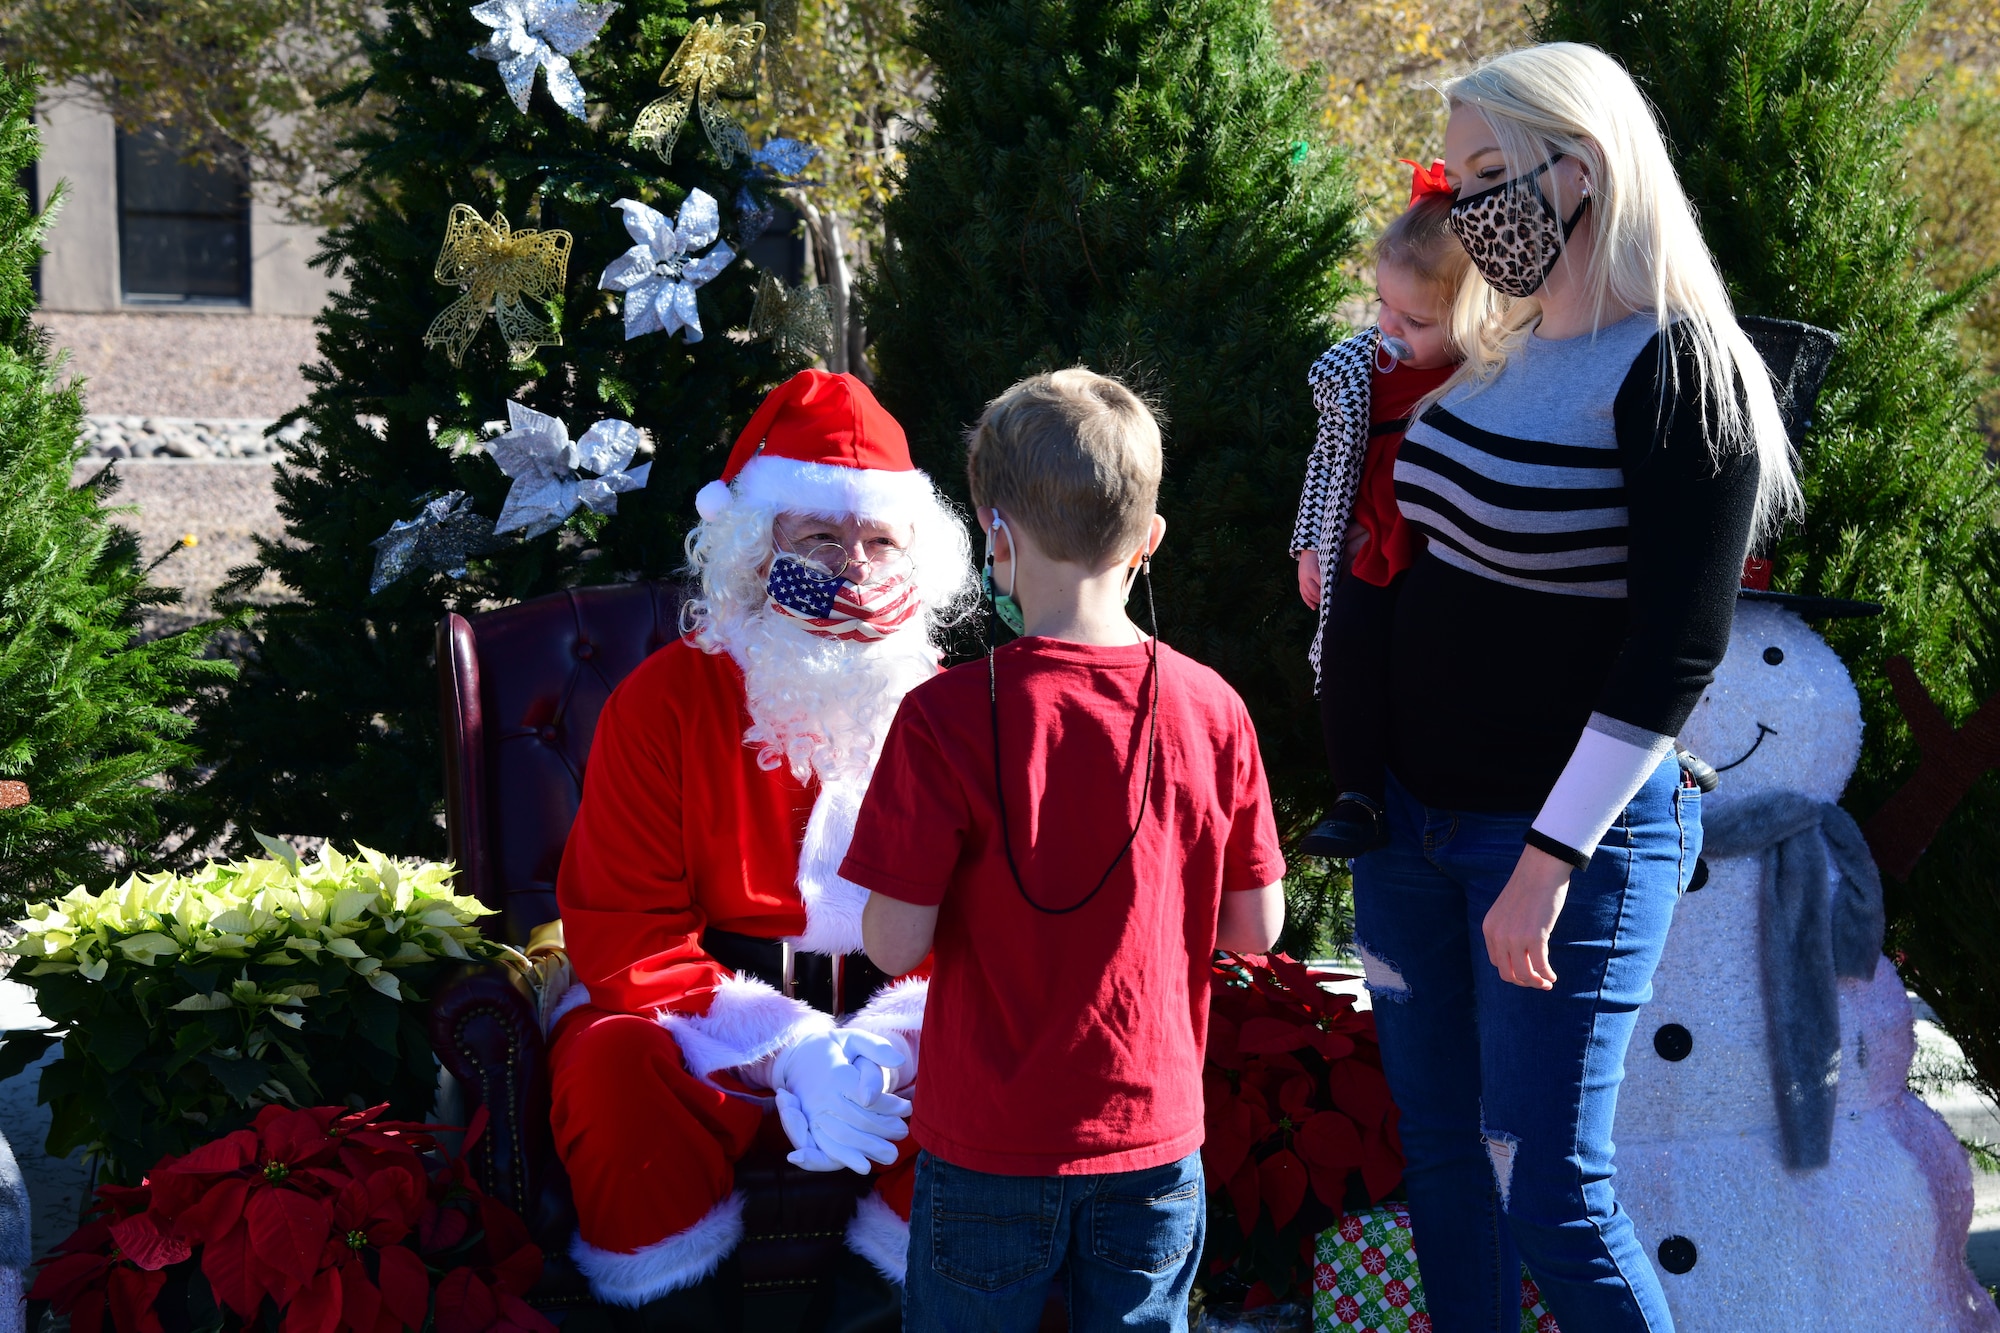 Santa greets families, takes photos and hands out candy canes to the kids during the Airman and Family Readiness Operation Holiday Hope event, Dec. 5, 2020, Nellis Air Force Base, Nev. (U.S. Air Force Photo by Staff Sgt. Paige Yenke)